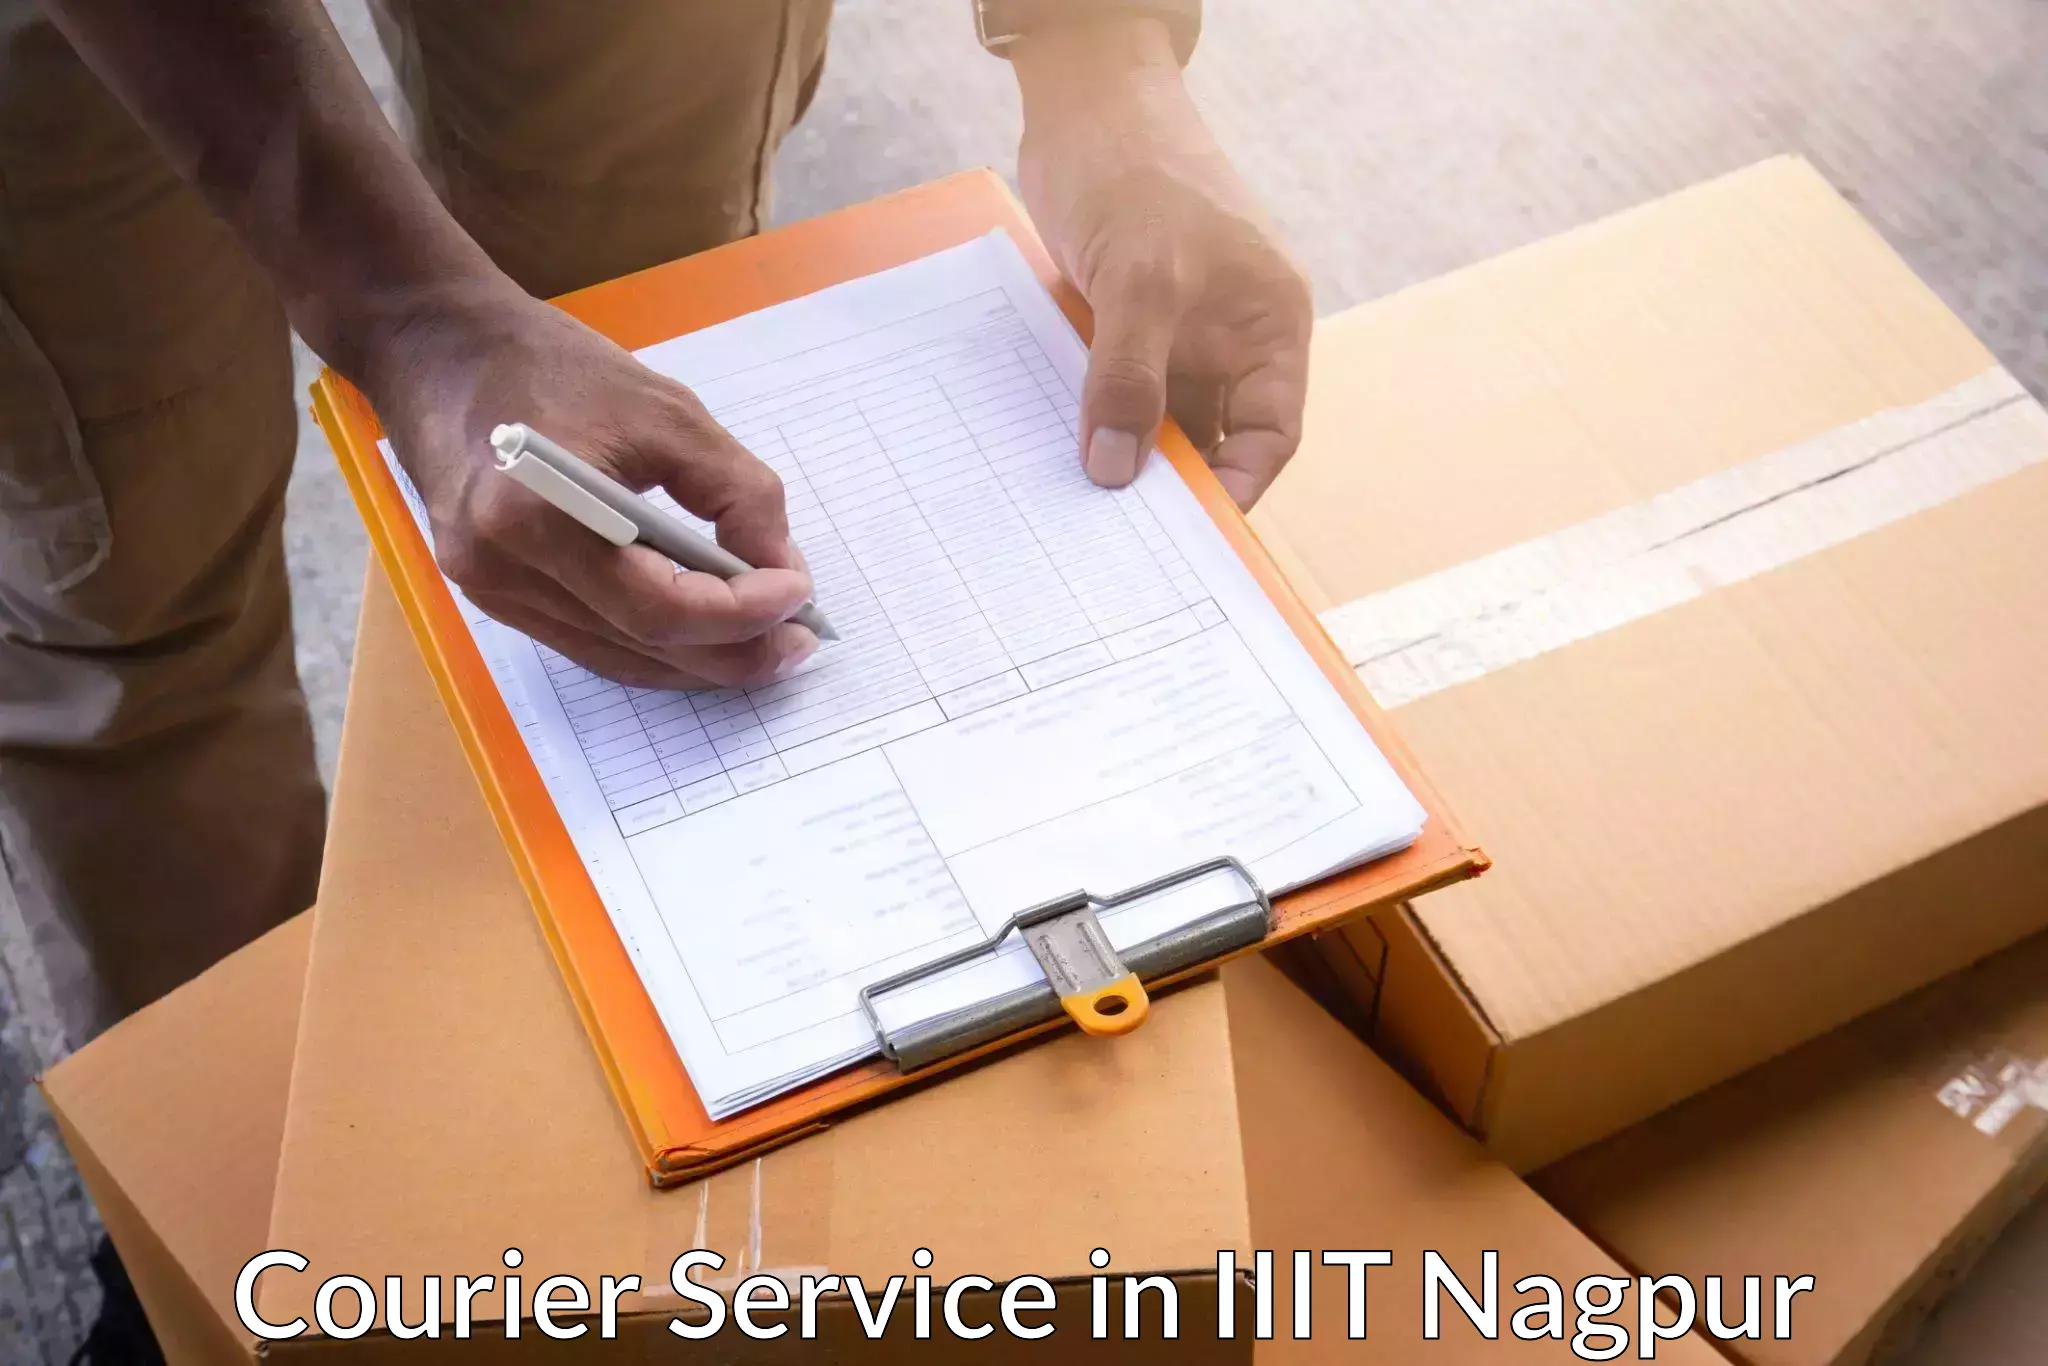 Personalized courier experiences in IIIT Nagpur